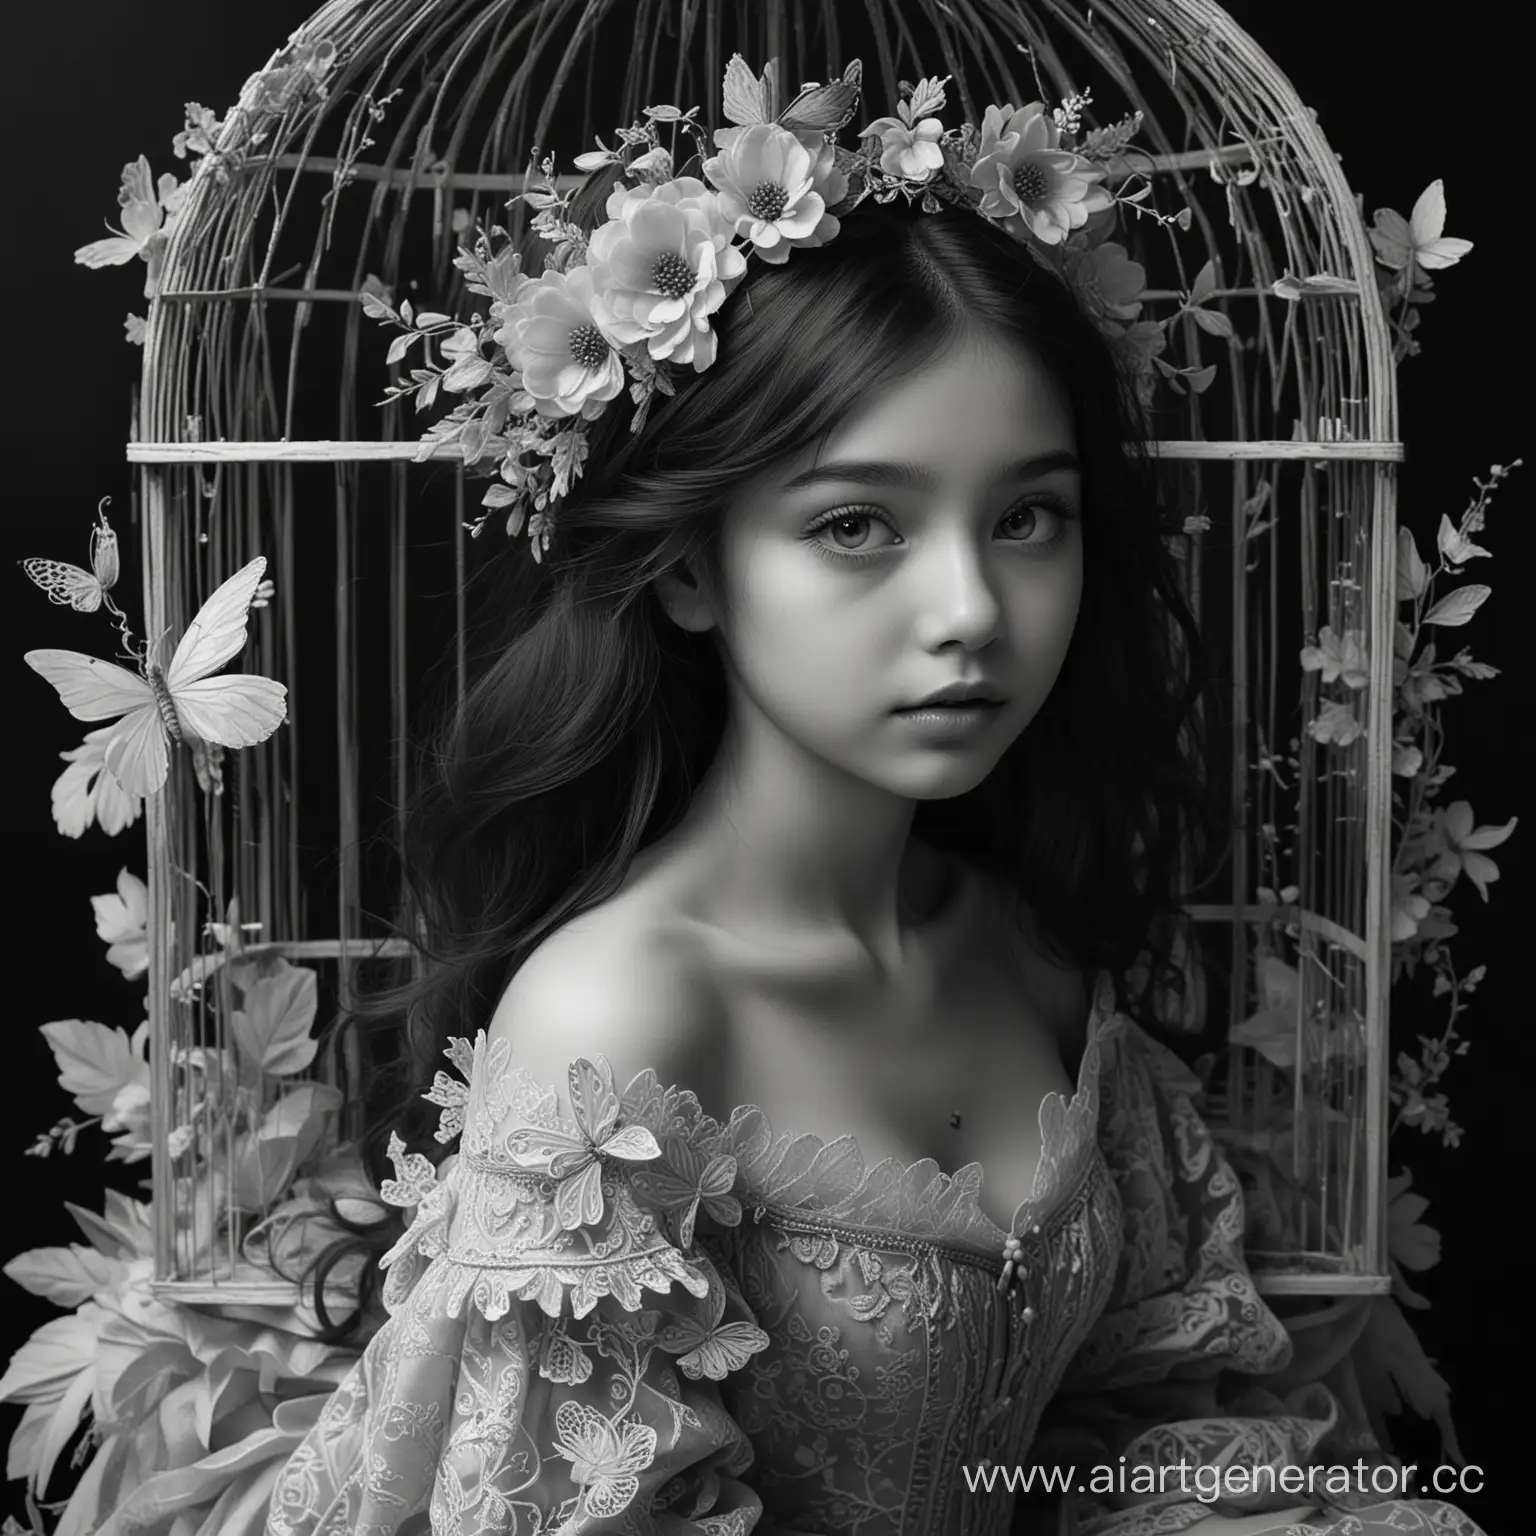 masterpiece.((black background)),greyscale,black and white,
(solo),((an extremely delicate and beautiful monochrome girl sitting on the birdcage)),((extremely detailed eyes and face)) with (black long hair) with (flutter hair) with (headdress) with (expressionless) with (full organdy dress)<glod and silvery embroidery>+(butterfly wings) with (tiny breasts).from side.,
flowing black.(floating petal).,
oil and watercolor painting, <lora:oil_and_watercolor_painting:1> <lora:sd_xl_offset_example-lora_1.0:1> <lora:FF.102.colossusProjectXLSFW_49bExperimental.LORA:1>, ultra quality, ultra detailed

Negative prompt: lowres,bad anatomy,bad hands,text,error,missing fingers,extra digit,fewer digits,cropped,worst quality,low quality,normal quality,jpeg artifacts,signature,watermark,username,blurry,lowres,bad anatomy,bad hands,text,error,extra digit,fewer digits,cropped,worst quality,low quality,normal quality,jpeg artifacts,signature,watermark,username,blurry,ugly,pregnant,vore,duplicate,morbid,mut ilated,tran nsexual,hermaphrodite,long neck,mutated hands,poorly drawn hands,poorly drawn face,mutation,deformed,blurry,bad anatomy,bad proportions,malformed limbs,extra limbs,cloned face,disfigured,gross proportions,(((missing arms))),(((missing legs))),(((extra arms))),(((extra legs))),pubic hair,plump,bad legs,error legs,username,blurry,bad feet
